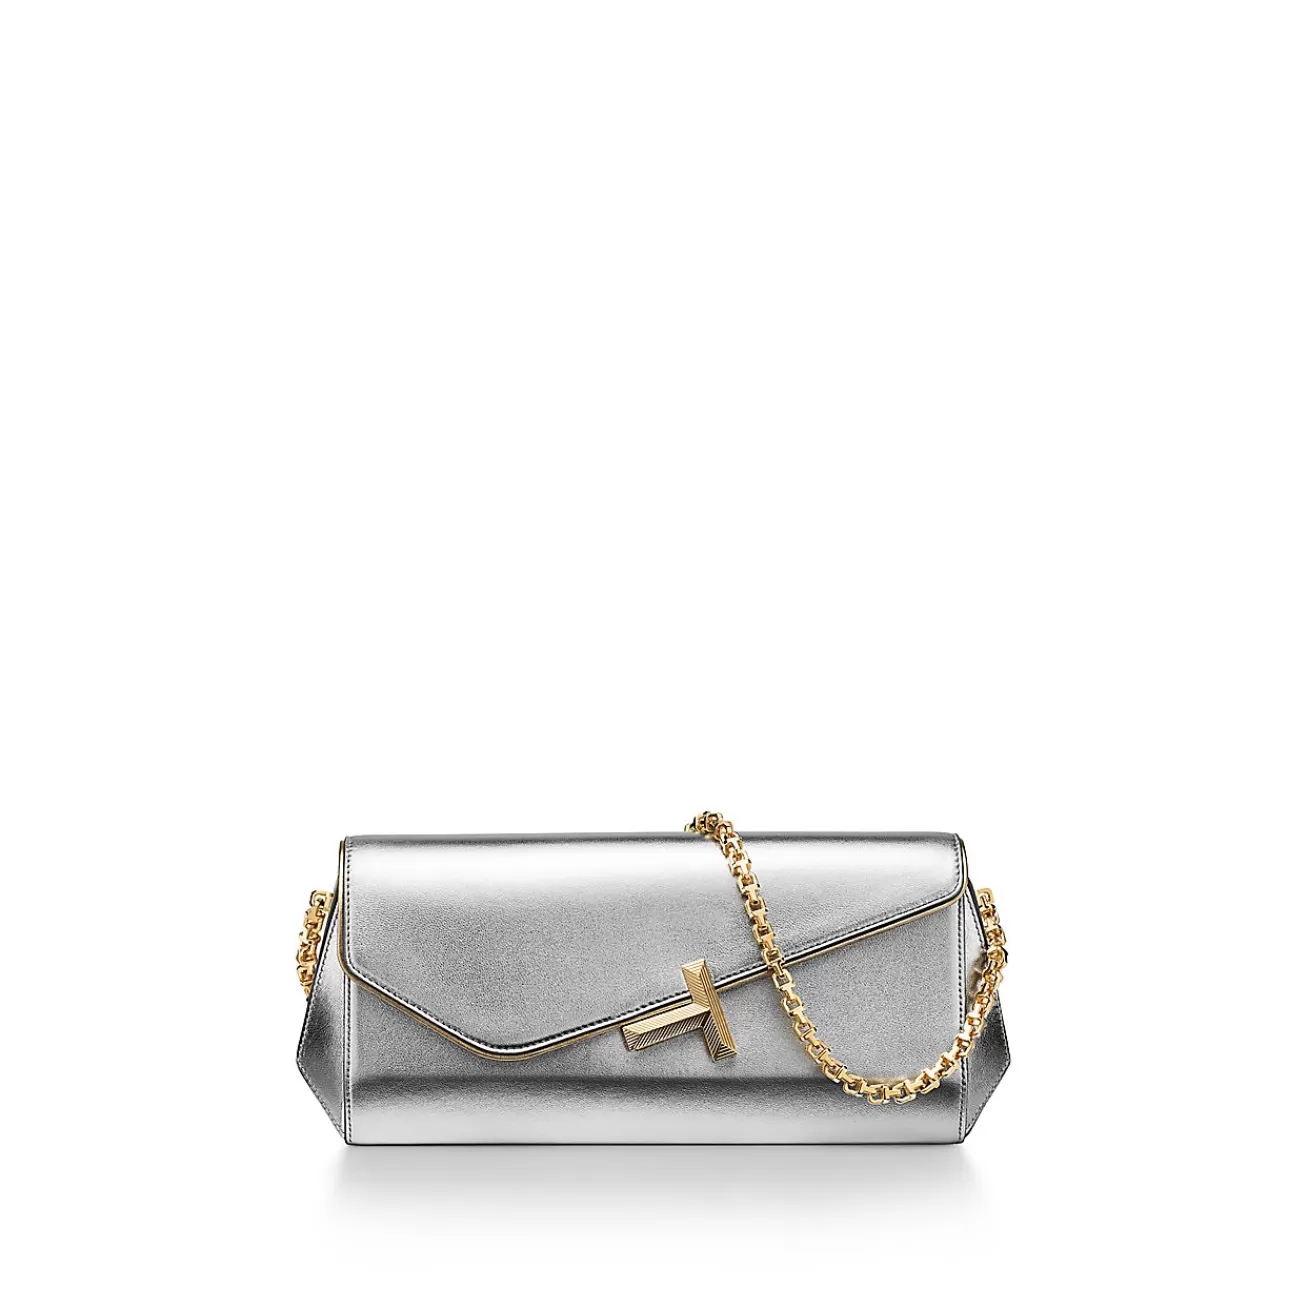 Tiffany & Co. Tiffany T Clutch in Silver-colored Leather on a Chain | ^Women Bags | Women's Accessories